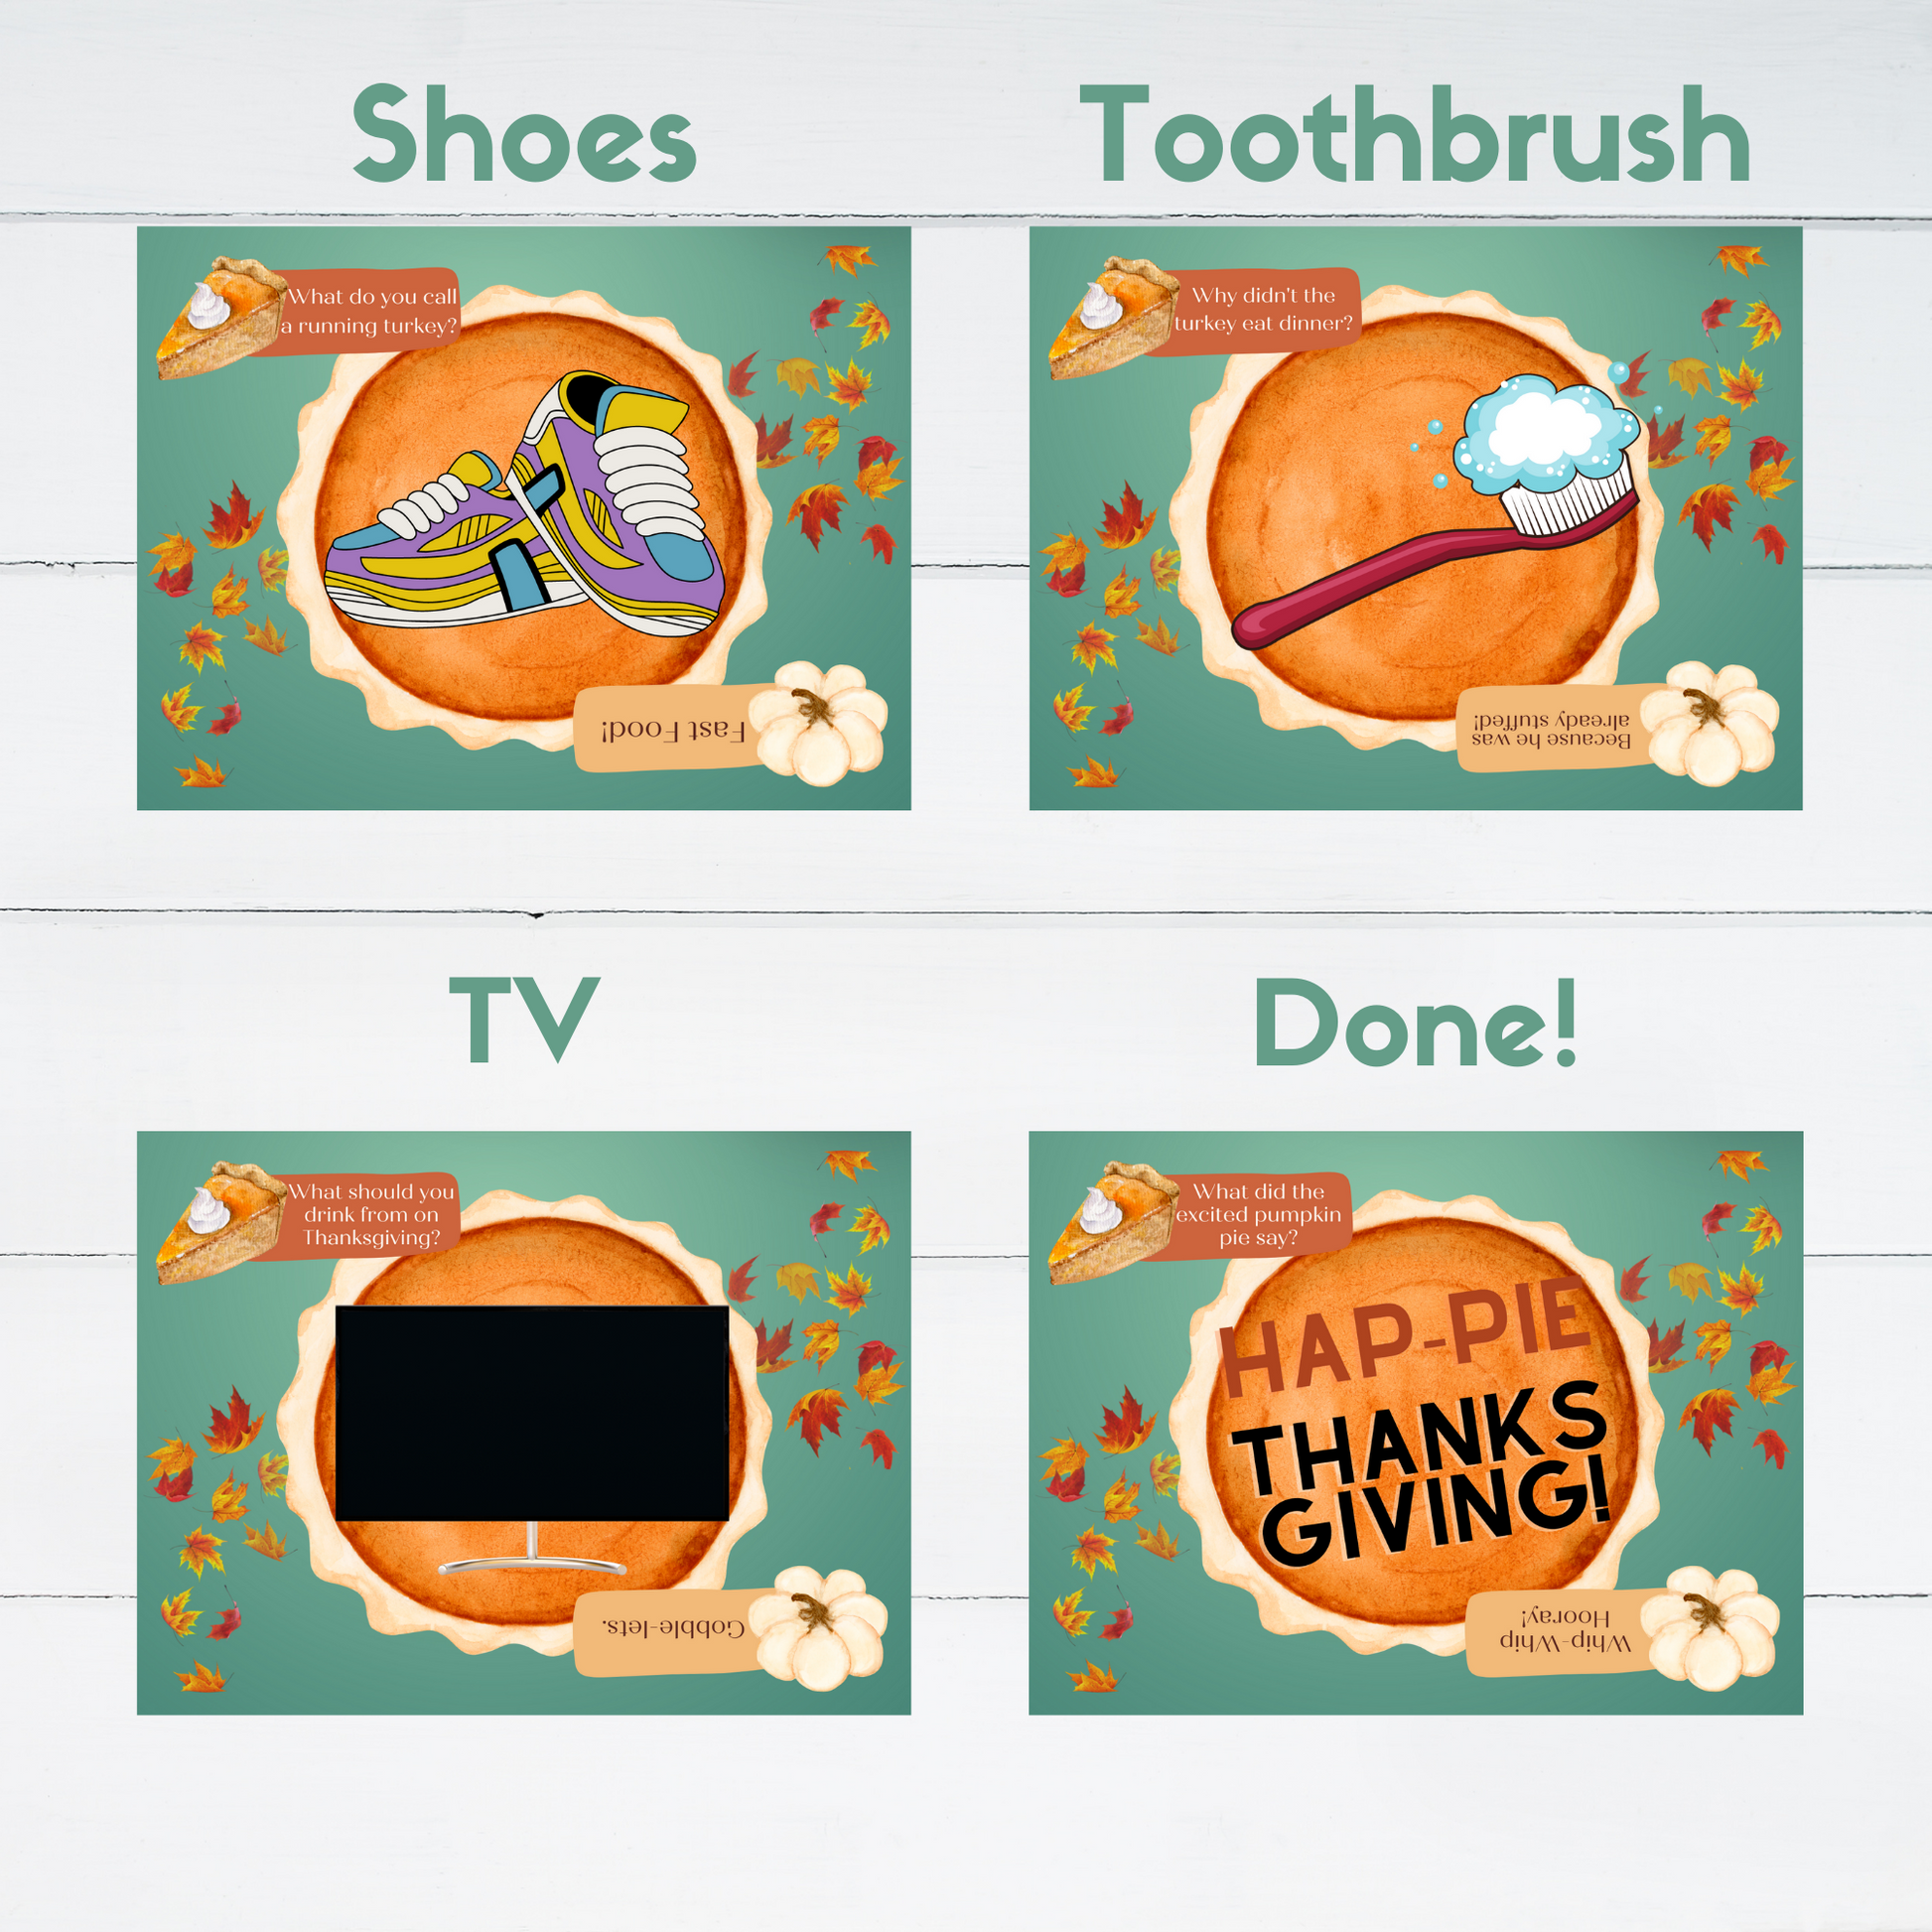 3 clue cards and one end card for a Thanksgiving Treasure Hunt are shown. Clues lead to shoes, toothbrush, and tv.